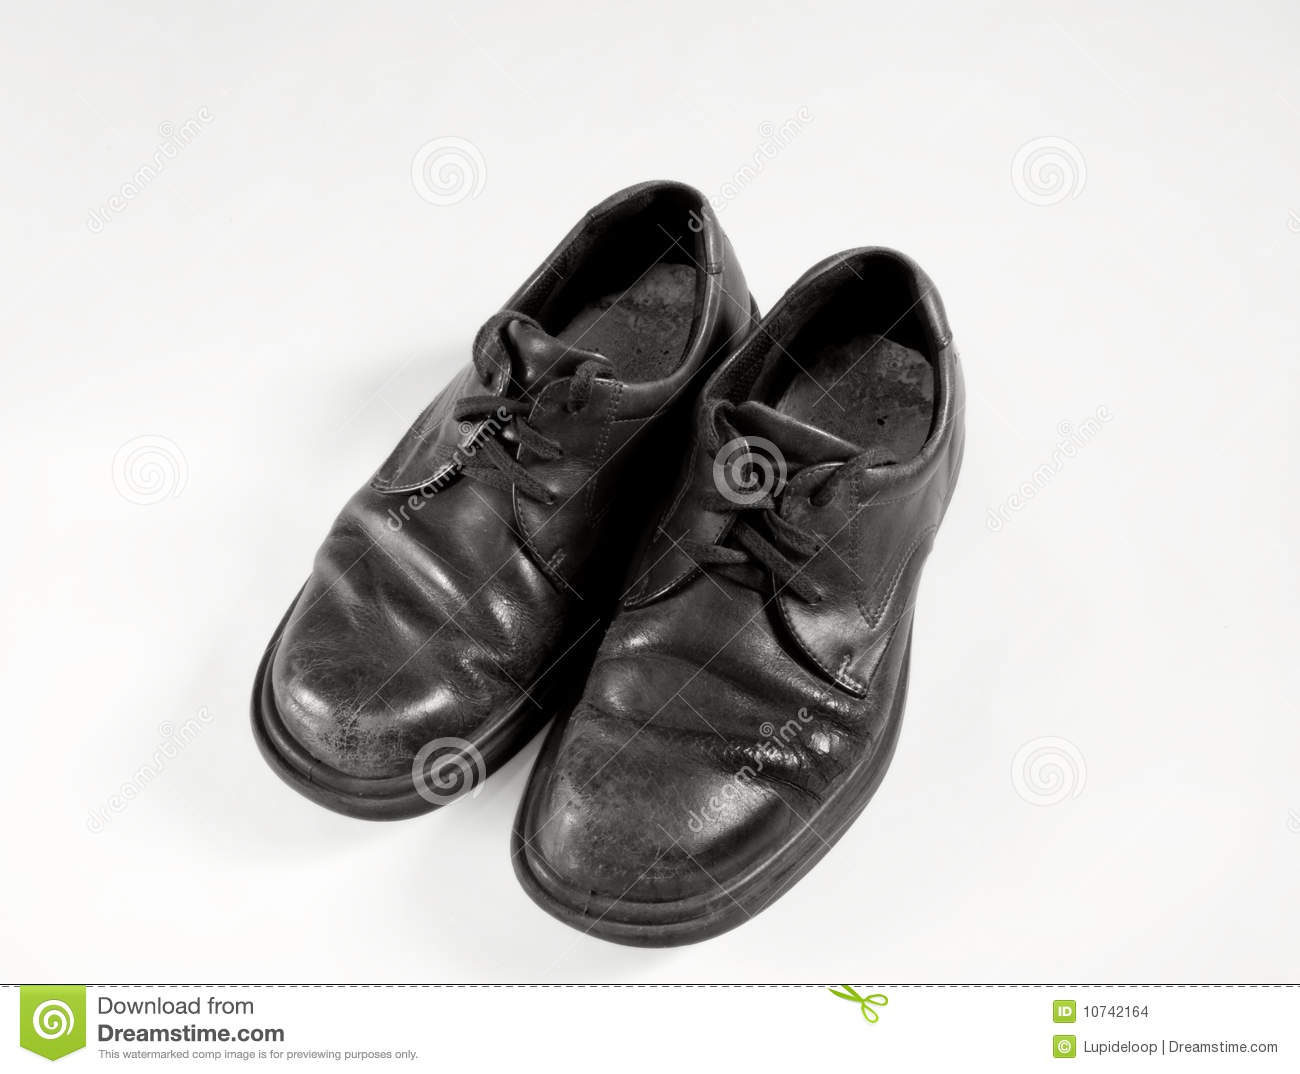 Old School Shoes In Black And White Stock Images   Image  10742164